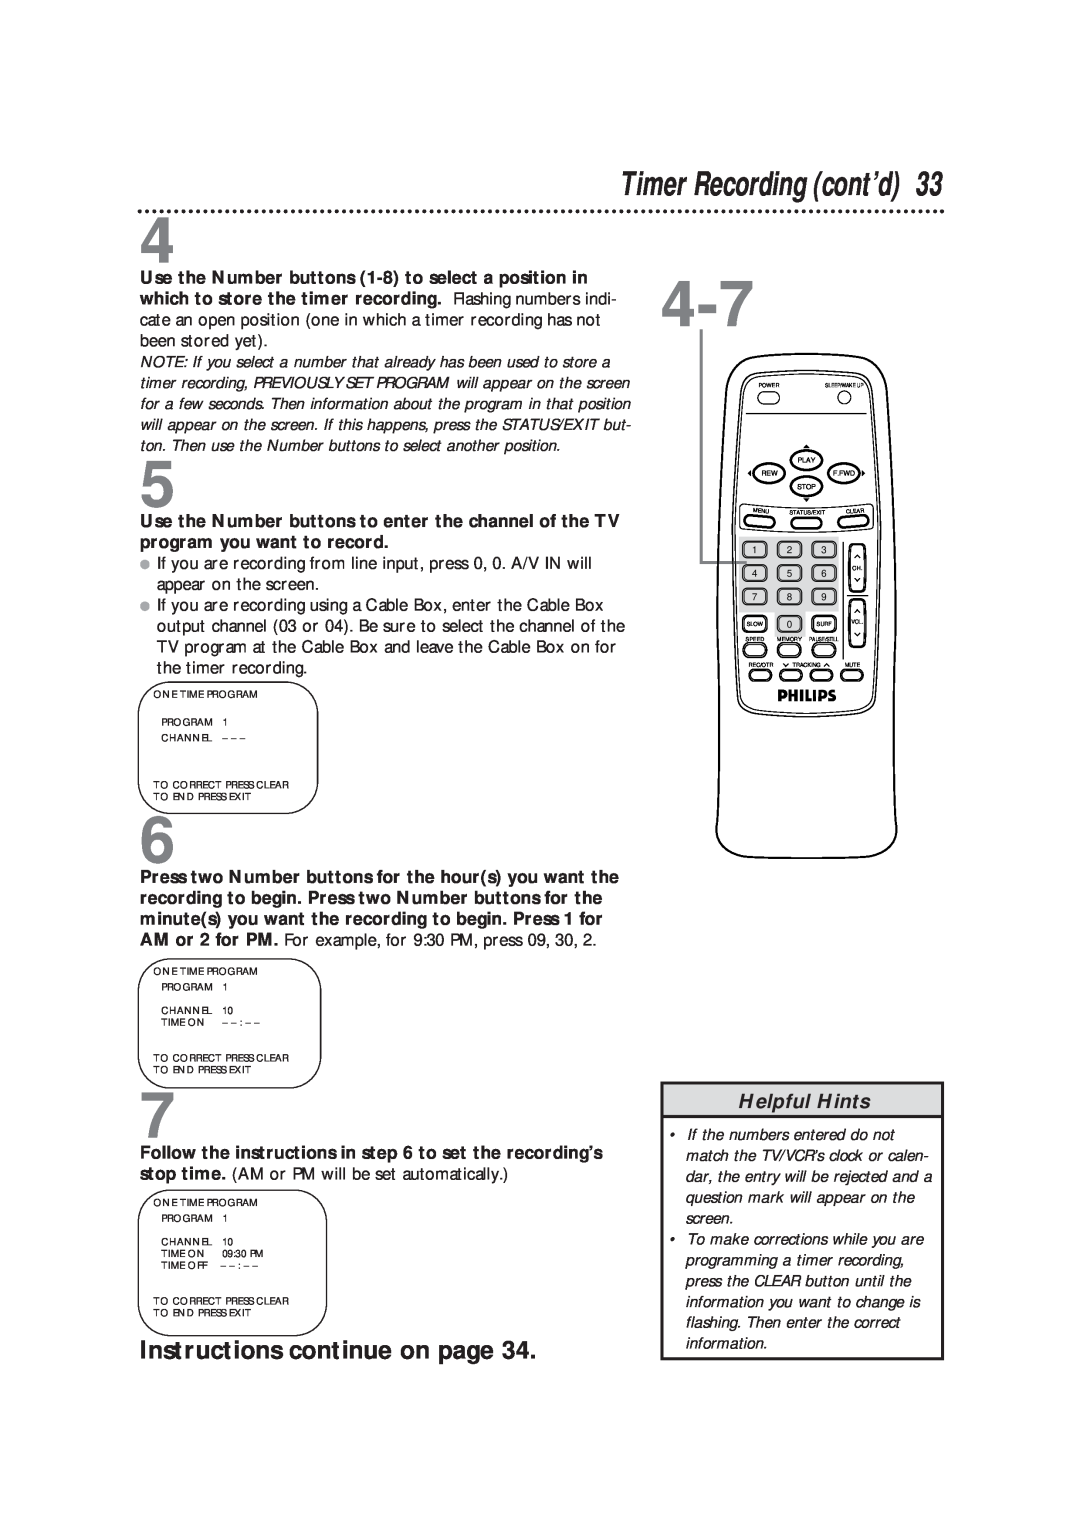 Magnavox CCB193AT owner manual Timer Recording cont’d, Instructions continue on page, Helpful Hints, information 